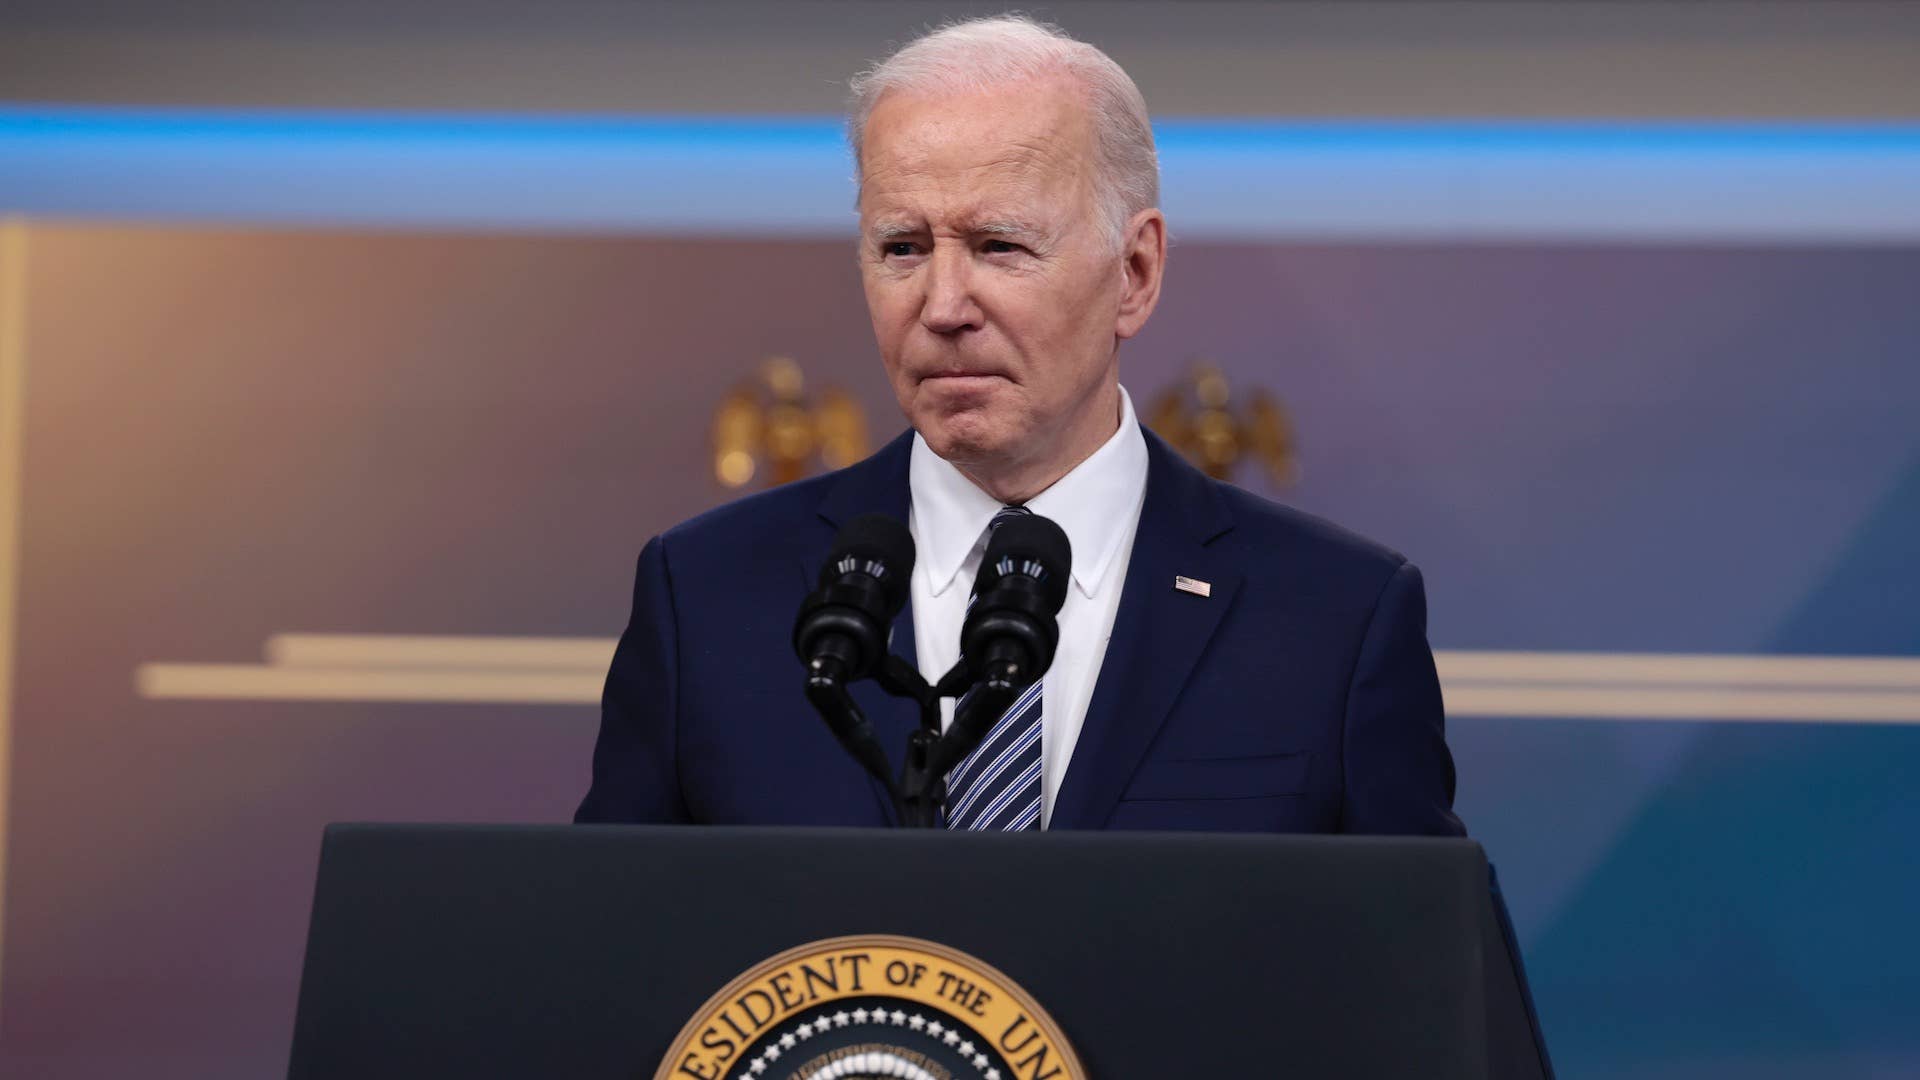 U.S. President Joe Biden delivers remarks on gas prices in the United States